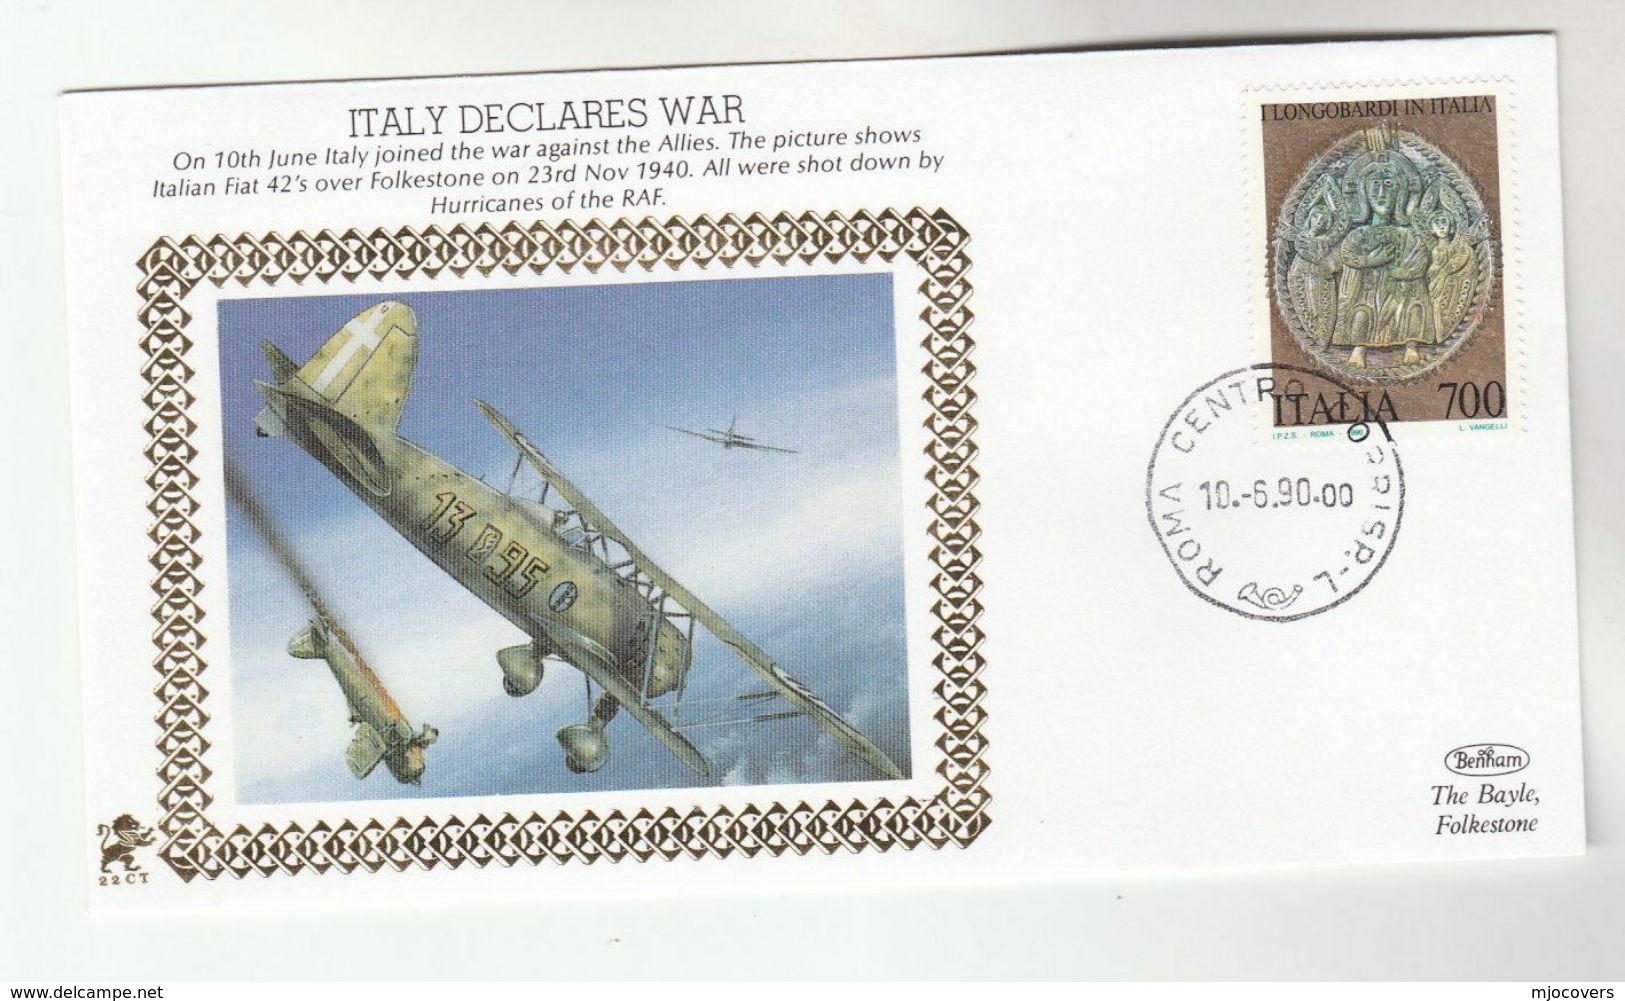 1990 ITALY Very Ltd EDITION COVER Anniv WAR DECLARED, RAF SHOOT DOWN FIAT 42 AIRCRAFT  WWII Event Stamps - Seconda Guerra Mondiale